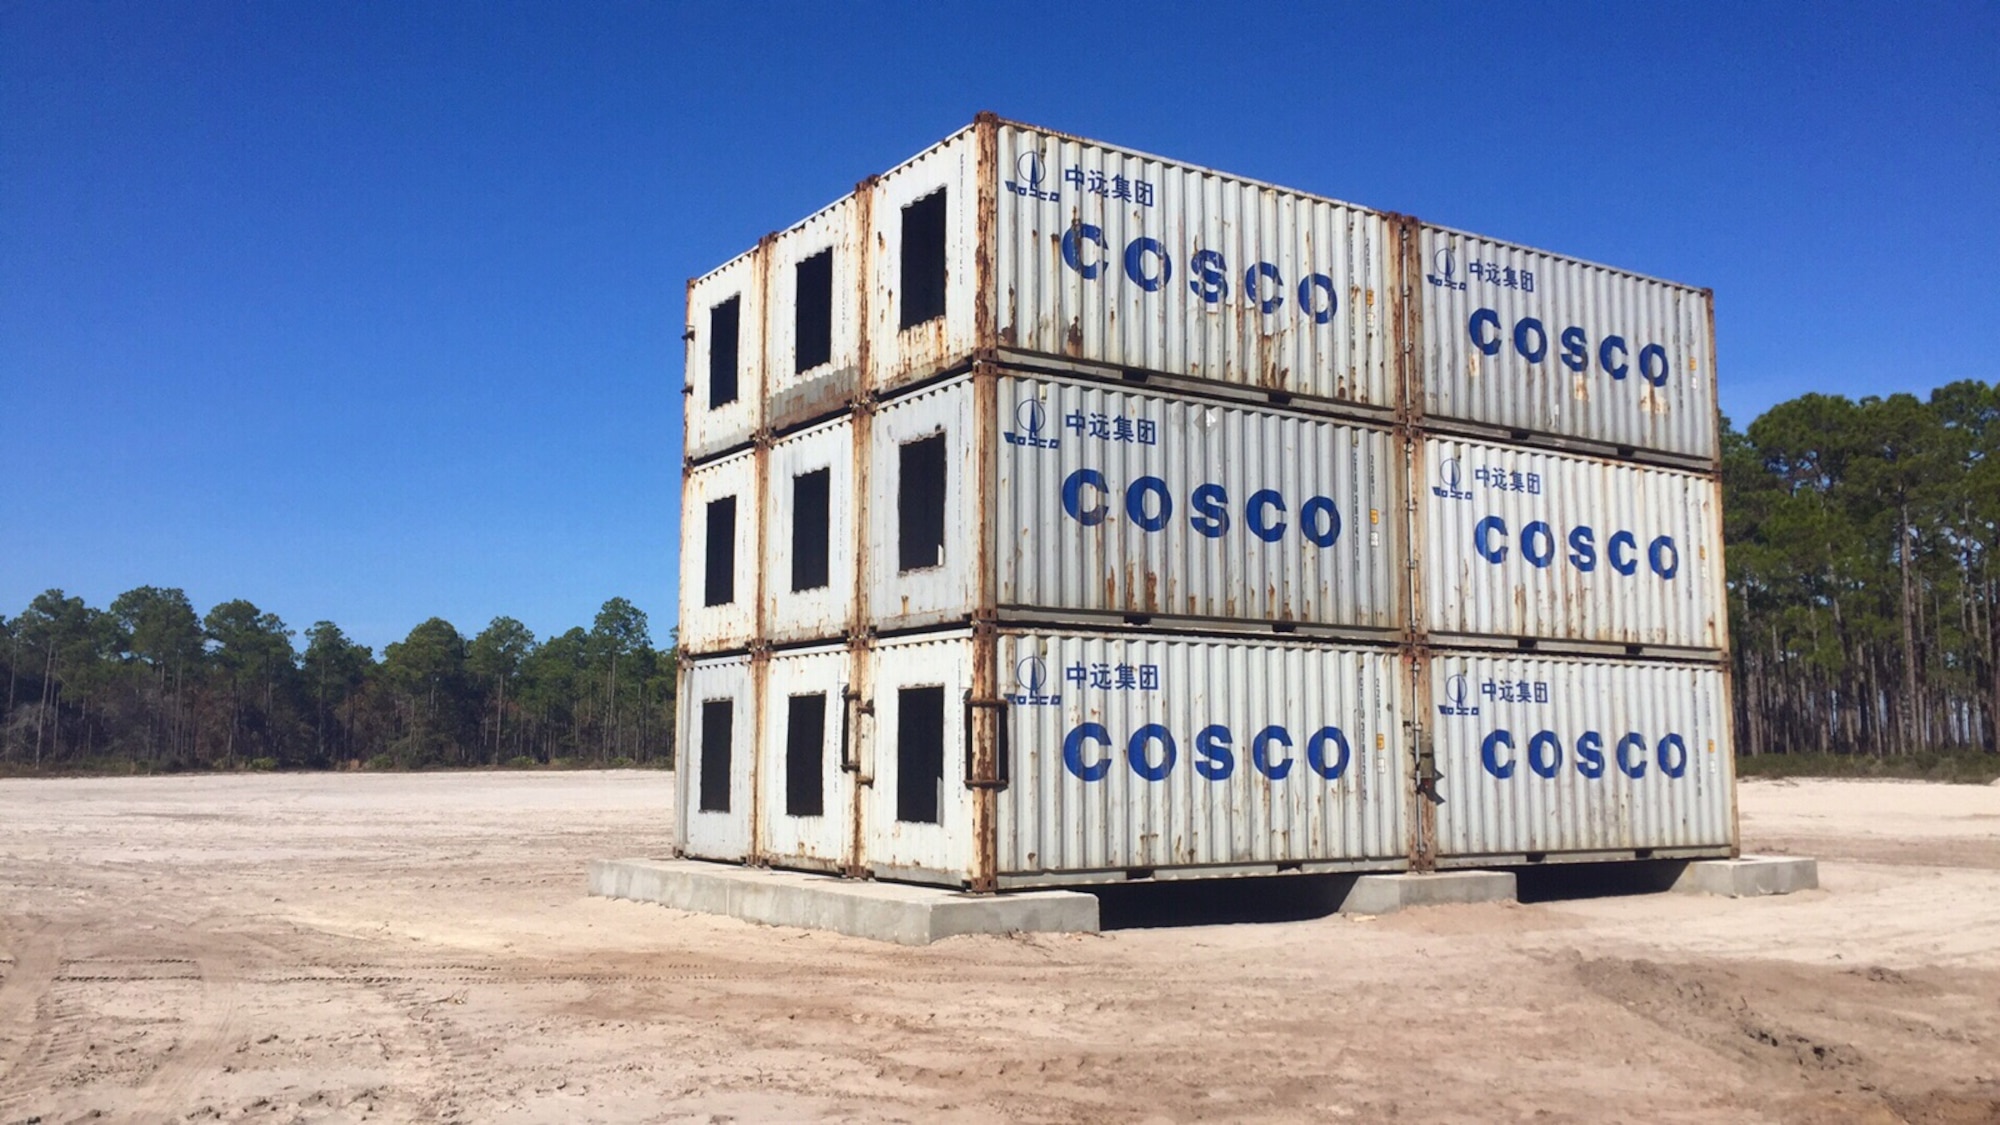 Members of the Air Force Civil Engineer Center recently tested expeditionary CONEX, or container express, dorms for progressive collapse at Tyndall Air Force Base, Florida. (Courtesy photo).